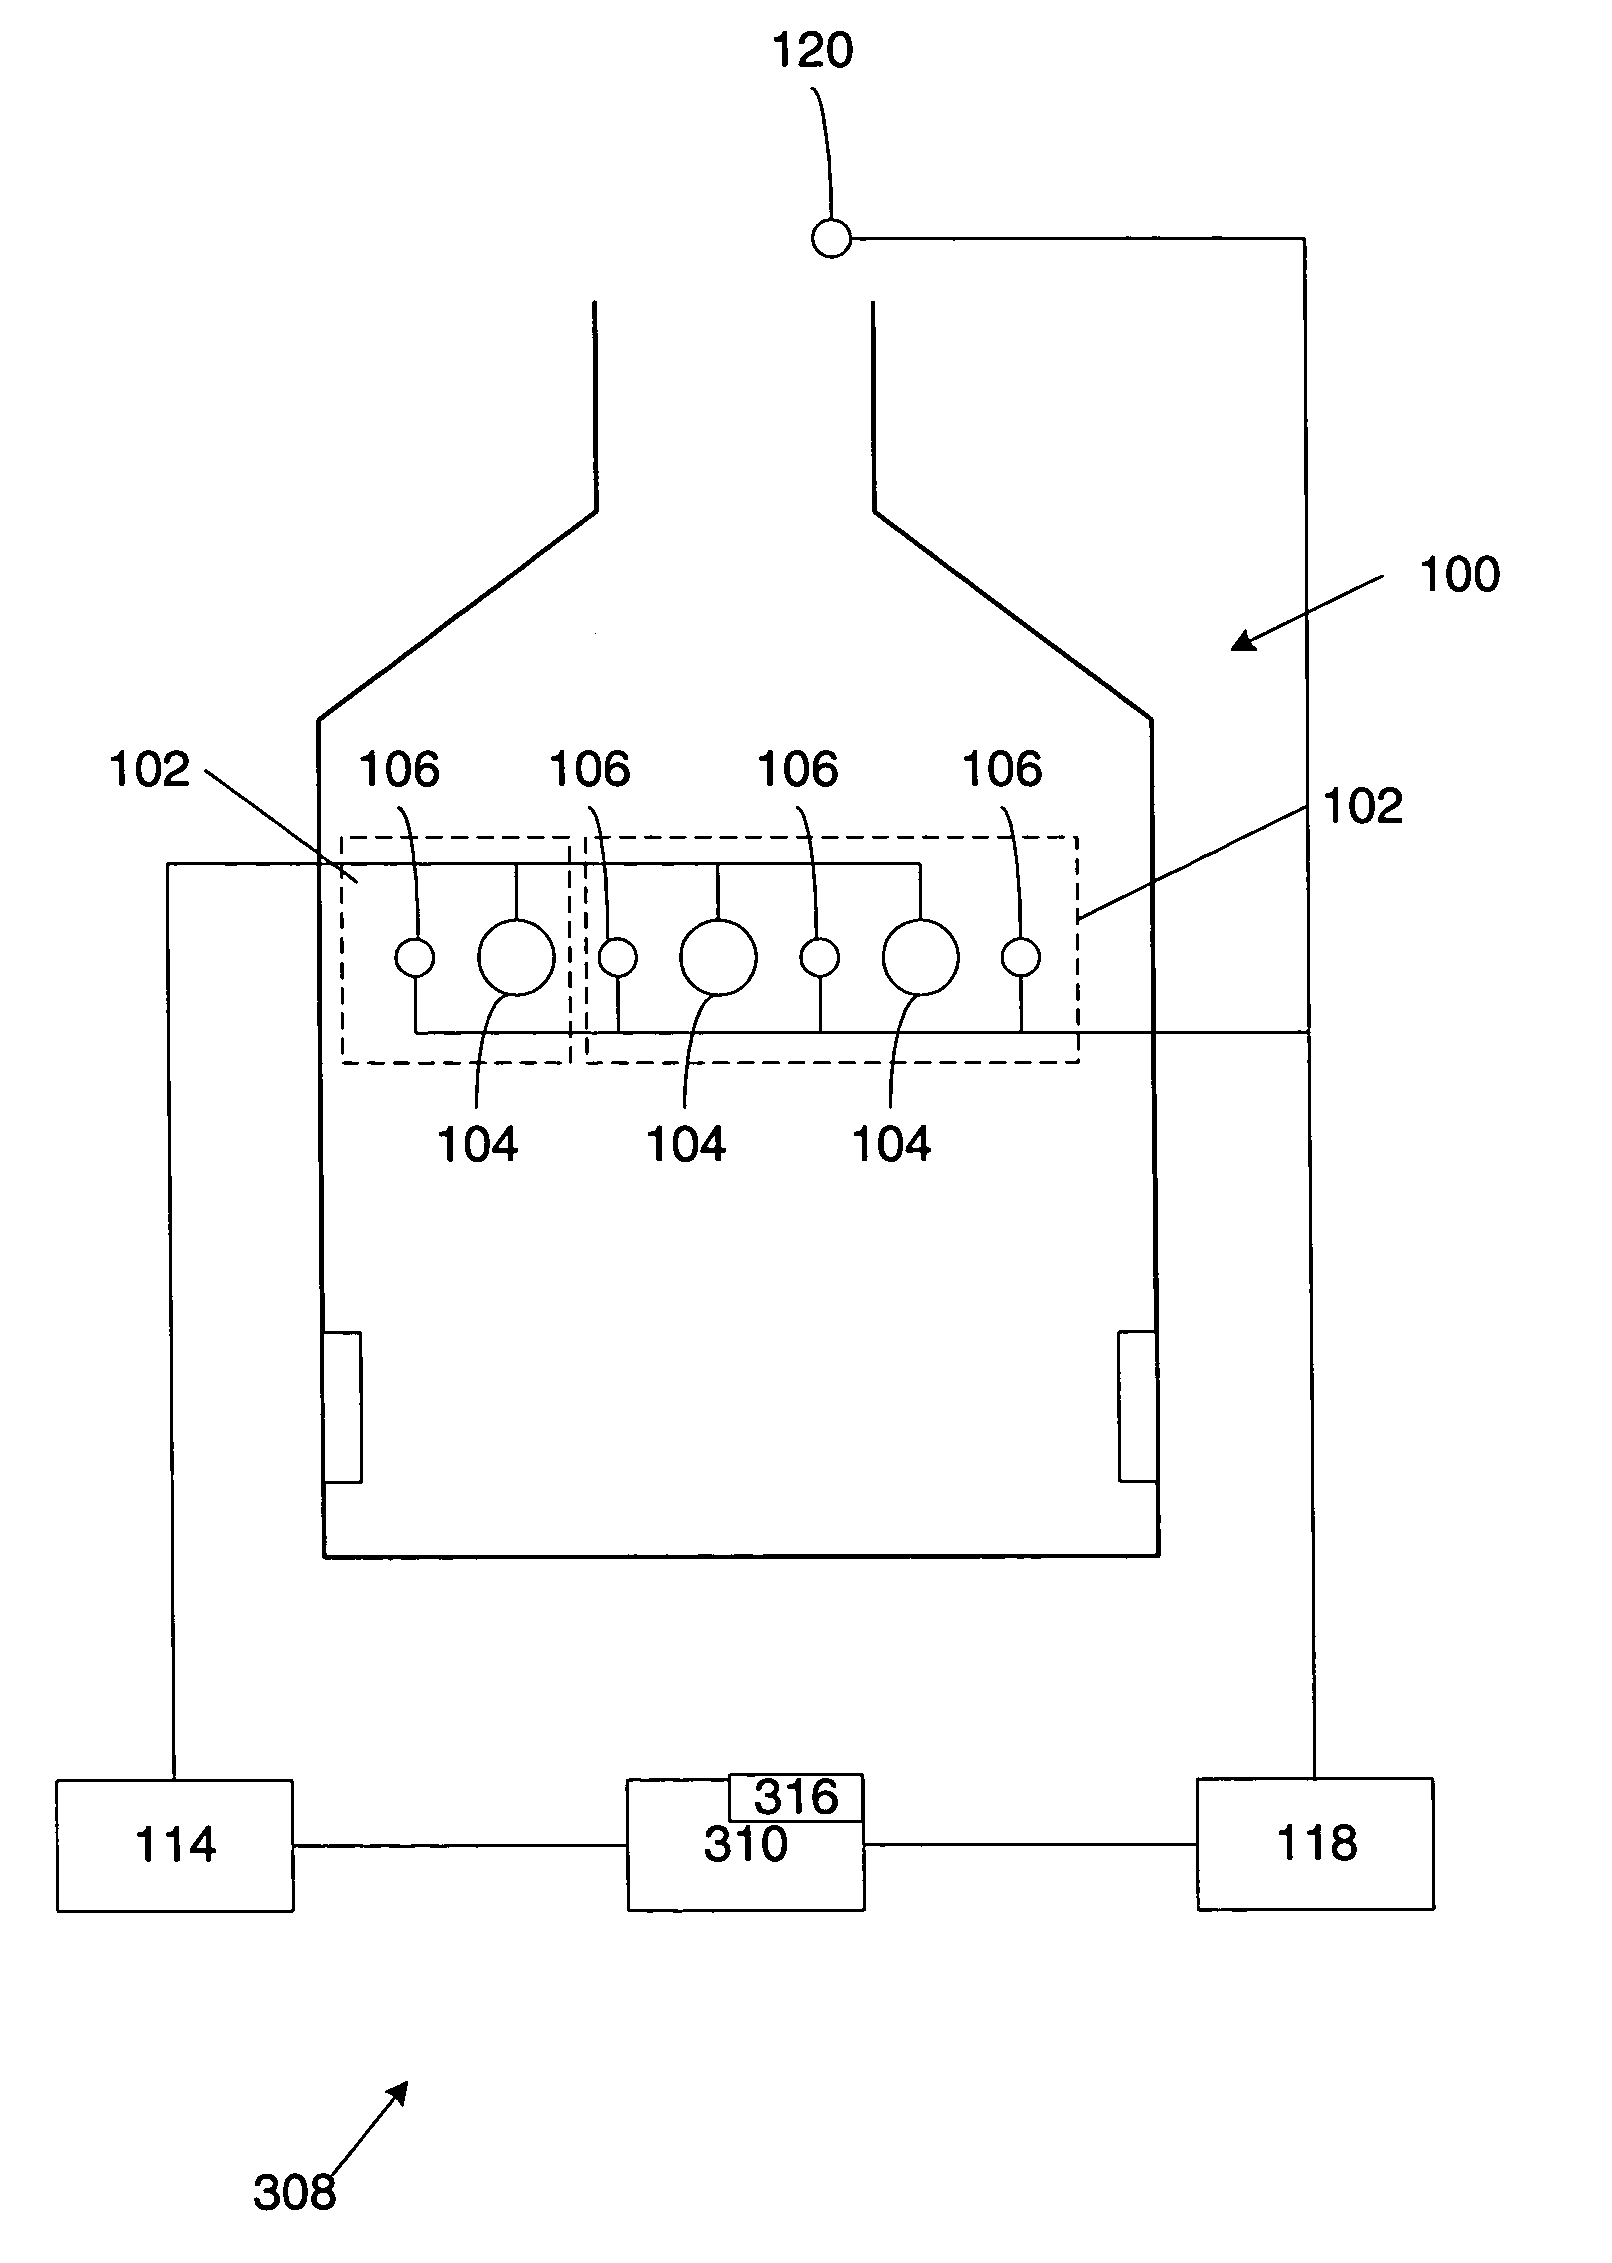 Method and system for sootblowing optimization